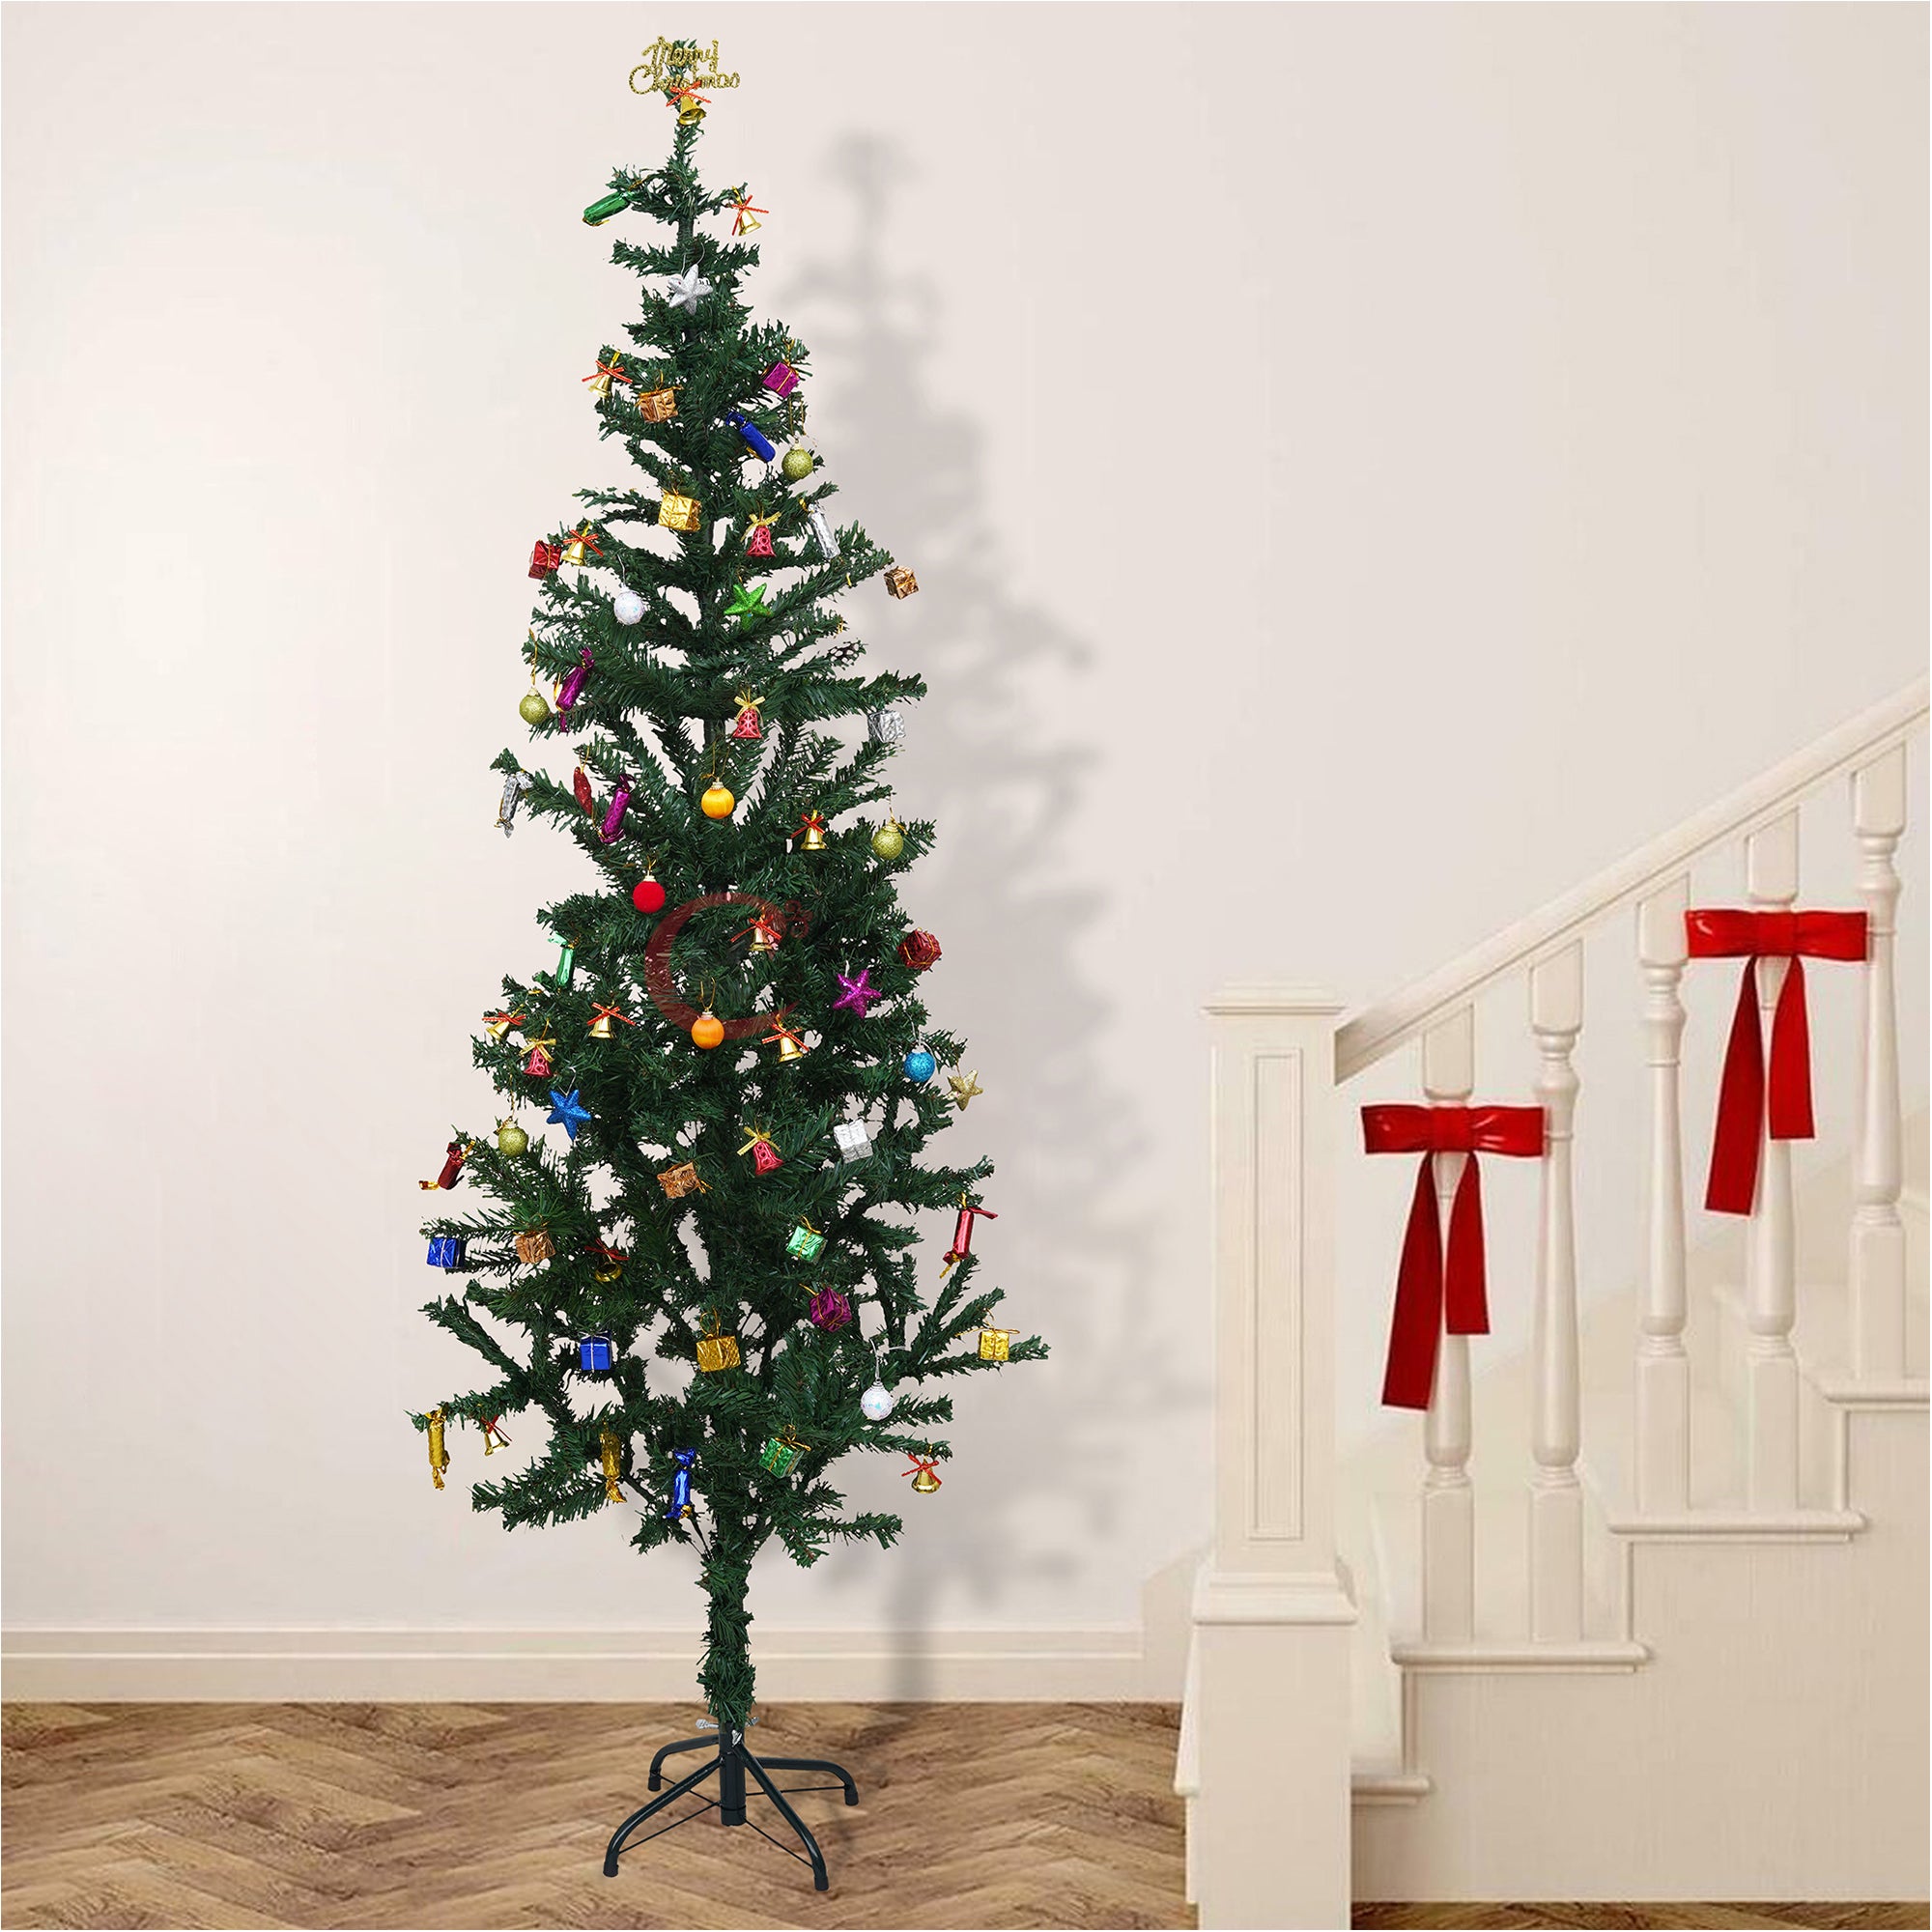 eCraftIndia 6 Feet Green Artificial Christmas Tree Xmas Pine Tree with Stand and 100 Christmas Decoration Ornaments Props - Merry Christmas Decoration Item for Home, Office, and Church